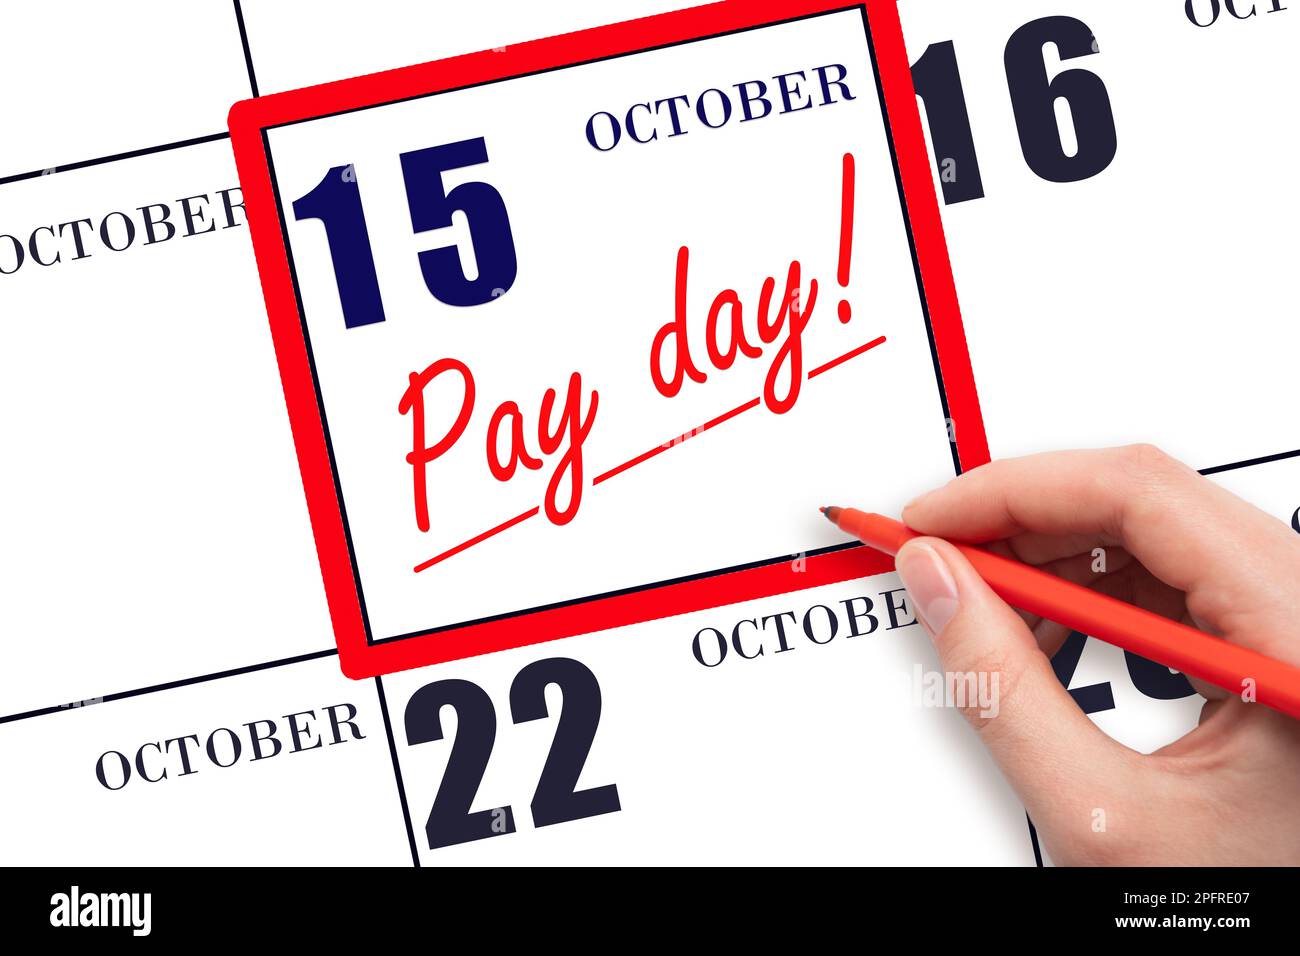 15th day of October. Hand writing text PAY DATE on calendar date October 15 and underline it. Payment due date.  Reminder concept of payment. Autumn m Stock Photo